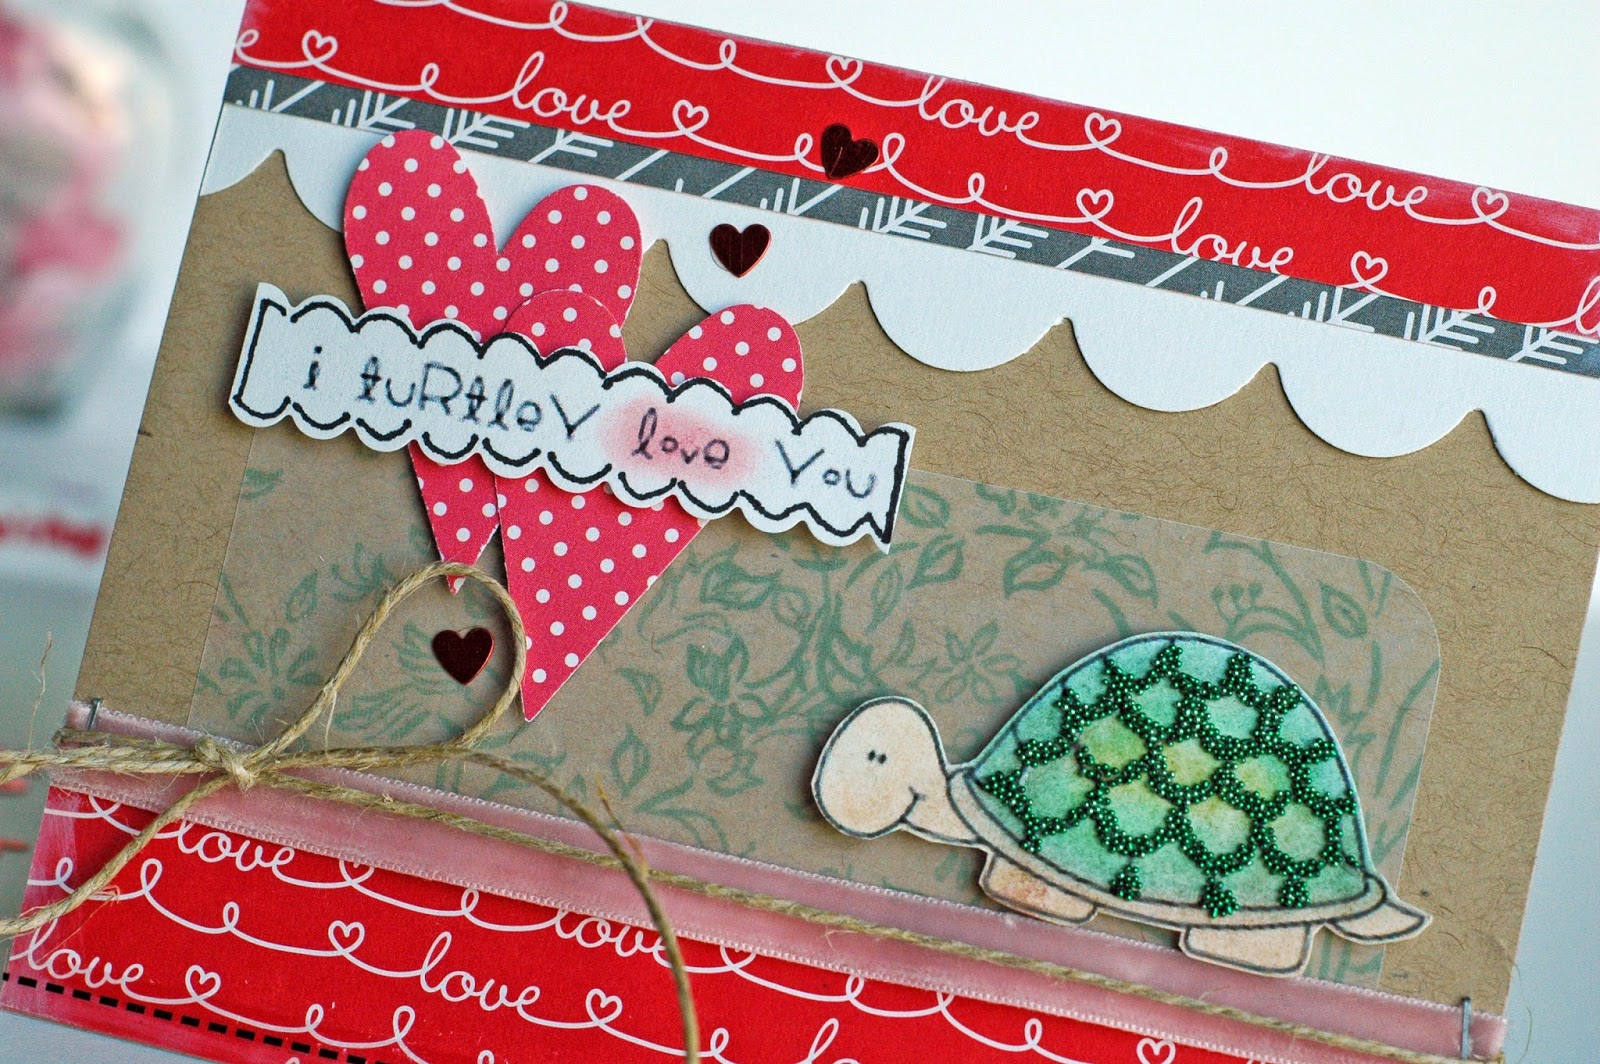 SRM Stickers Blog - I Turtley Love You Card by Cassonda - #janesdoodles #clearstamps #stickers #valentines #card